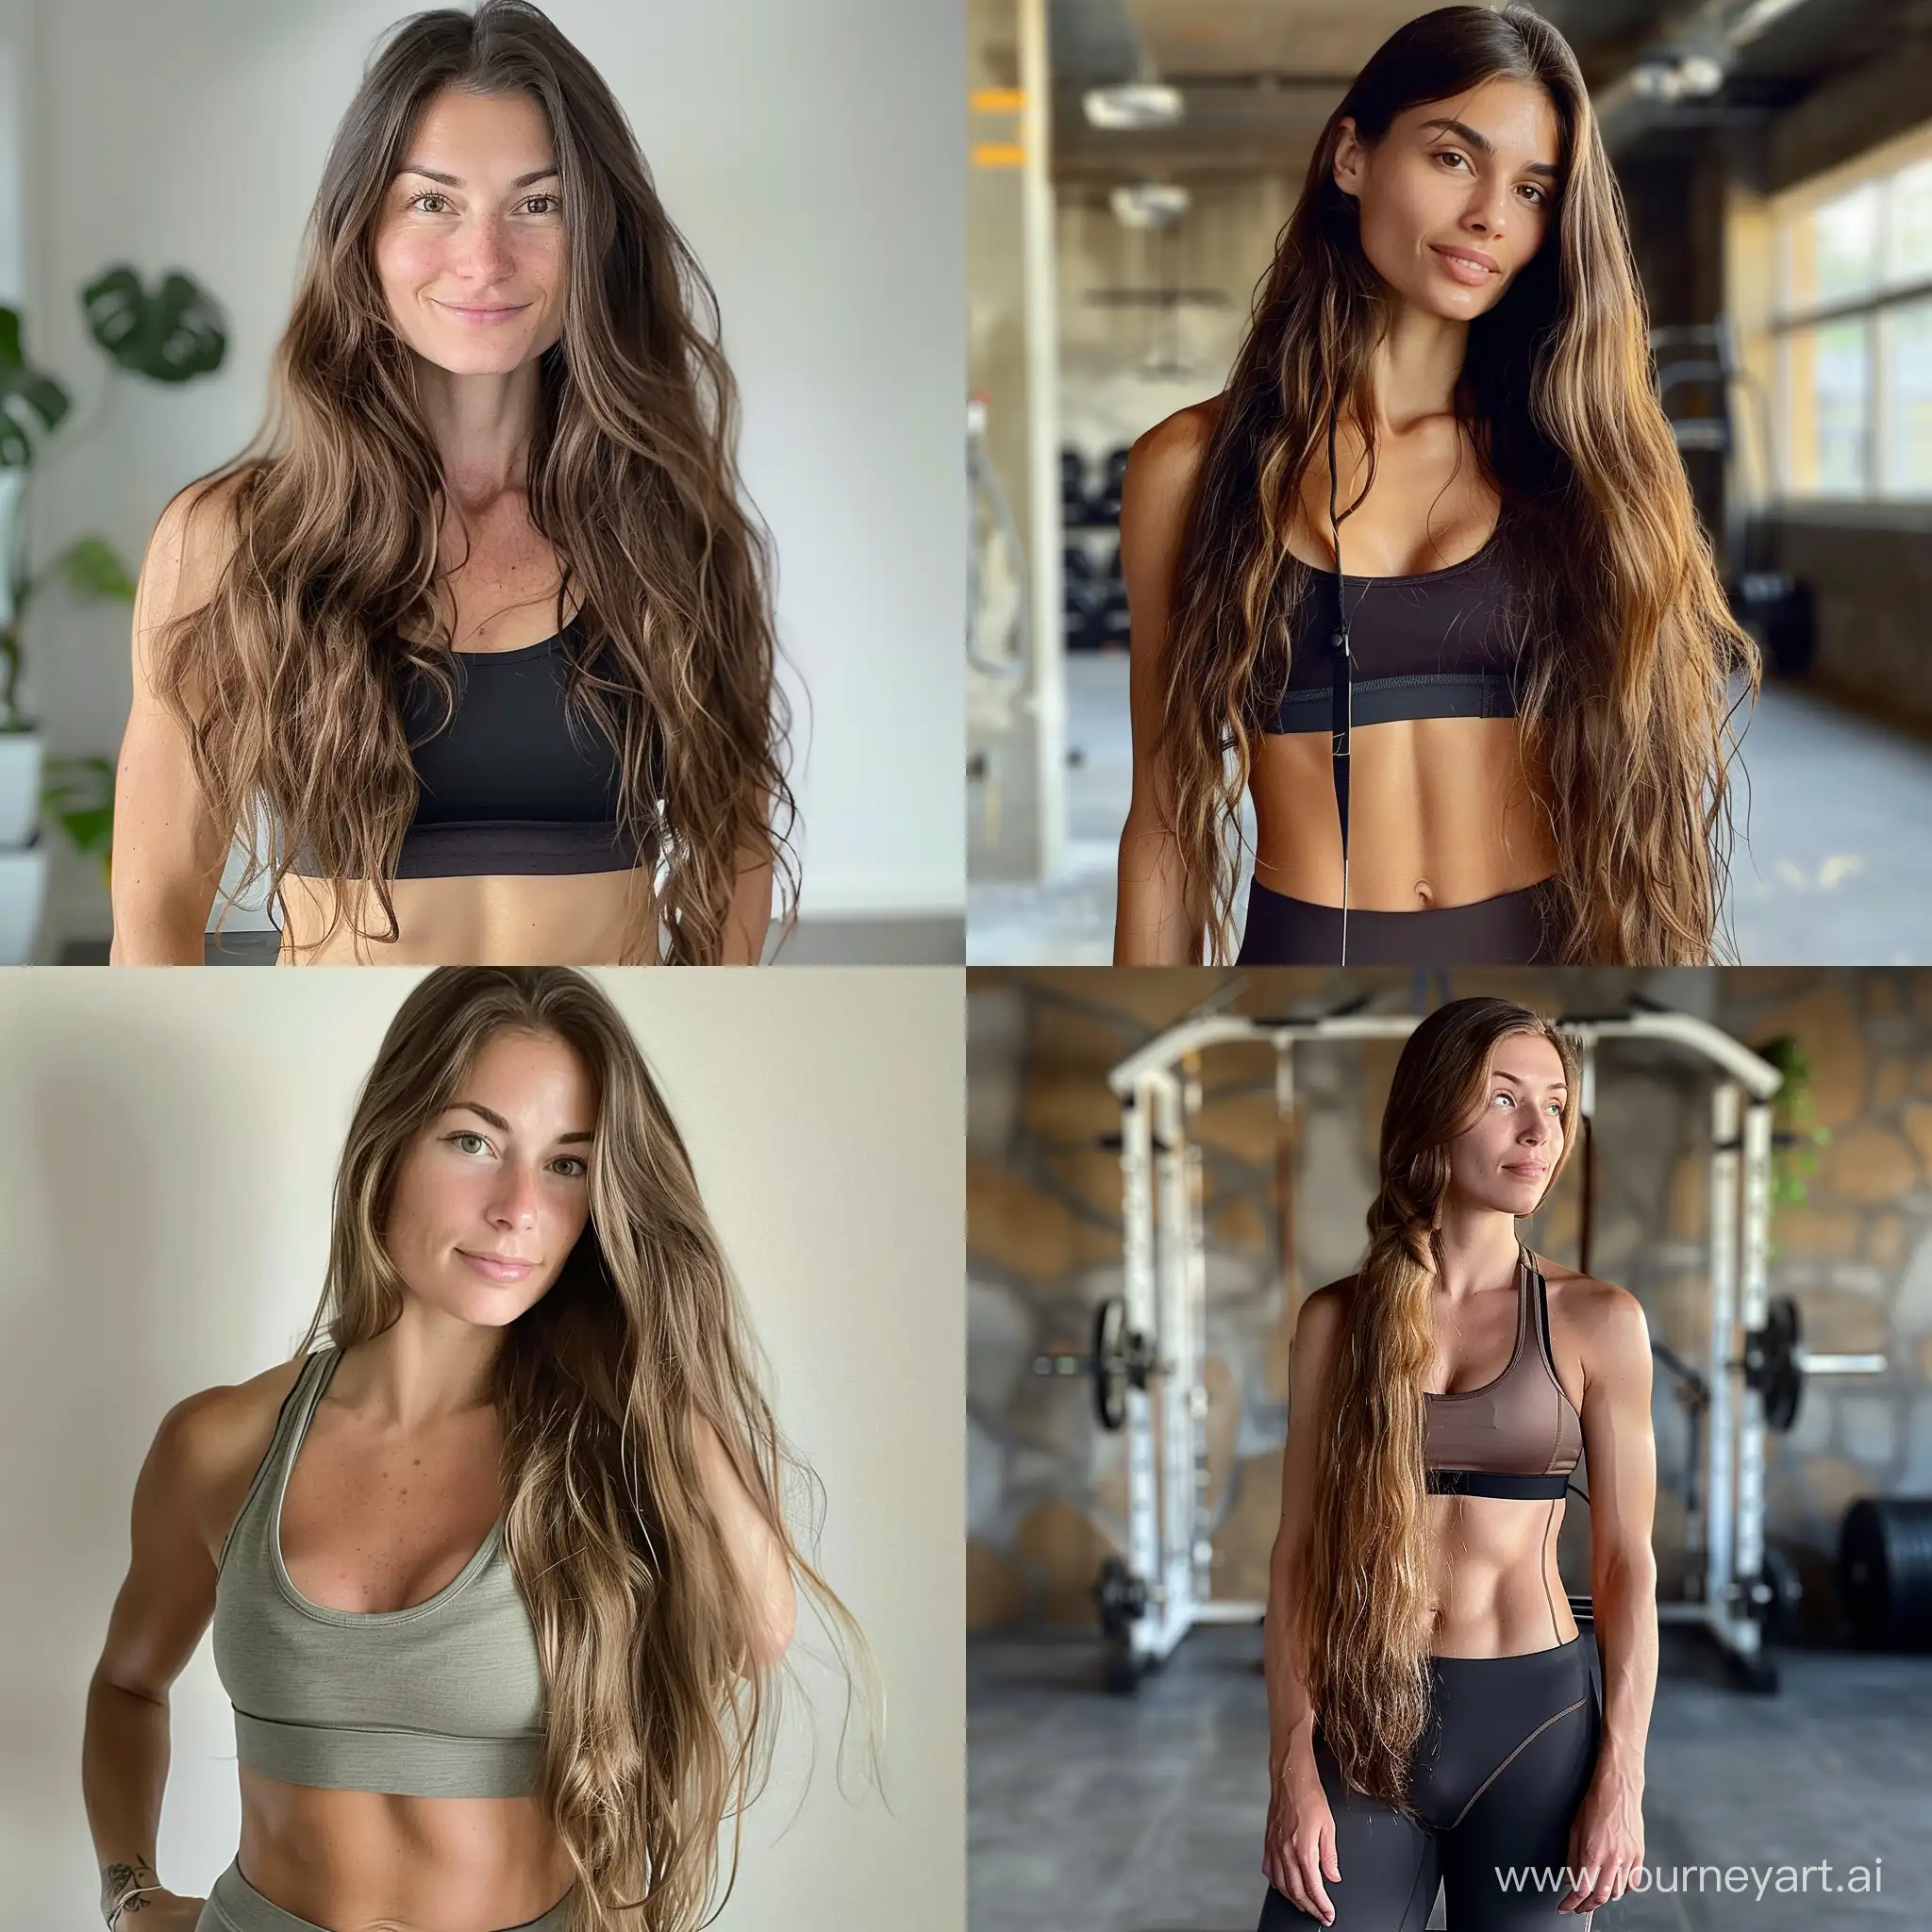 Elegant-30YearOld-Woman-Embracing-Fitness-with-Long-Hair